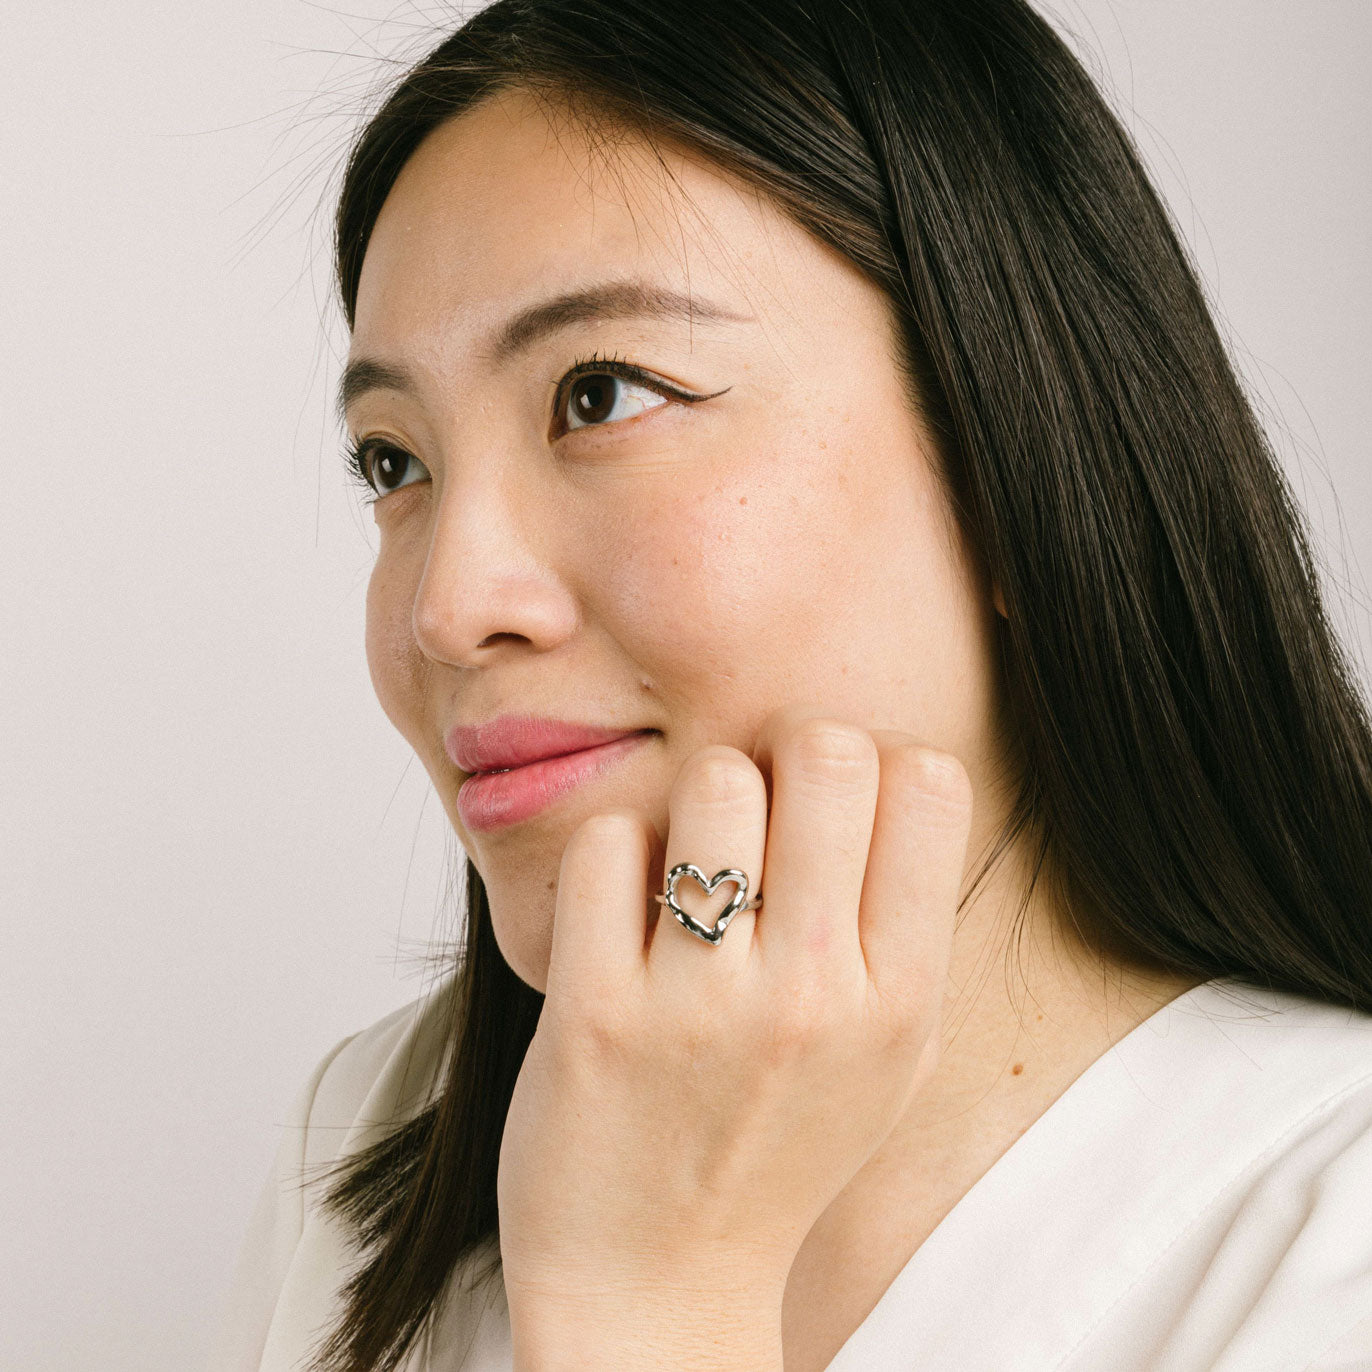 A model wearing the Ai Heart Ring in Silver is crafted with of 14K Gold Plated Stainless Steel, ensuring a durable and non-tarnishing construction. This piece is also water resistant and made without Lead, Nickel, or Cadmium for added safety. This is a single ring, with no ability to adjust.